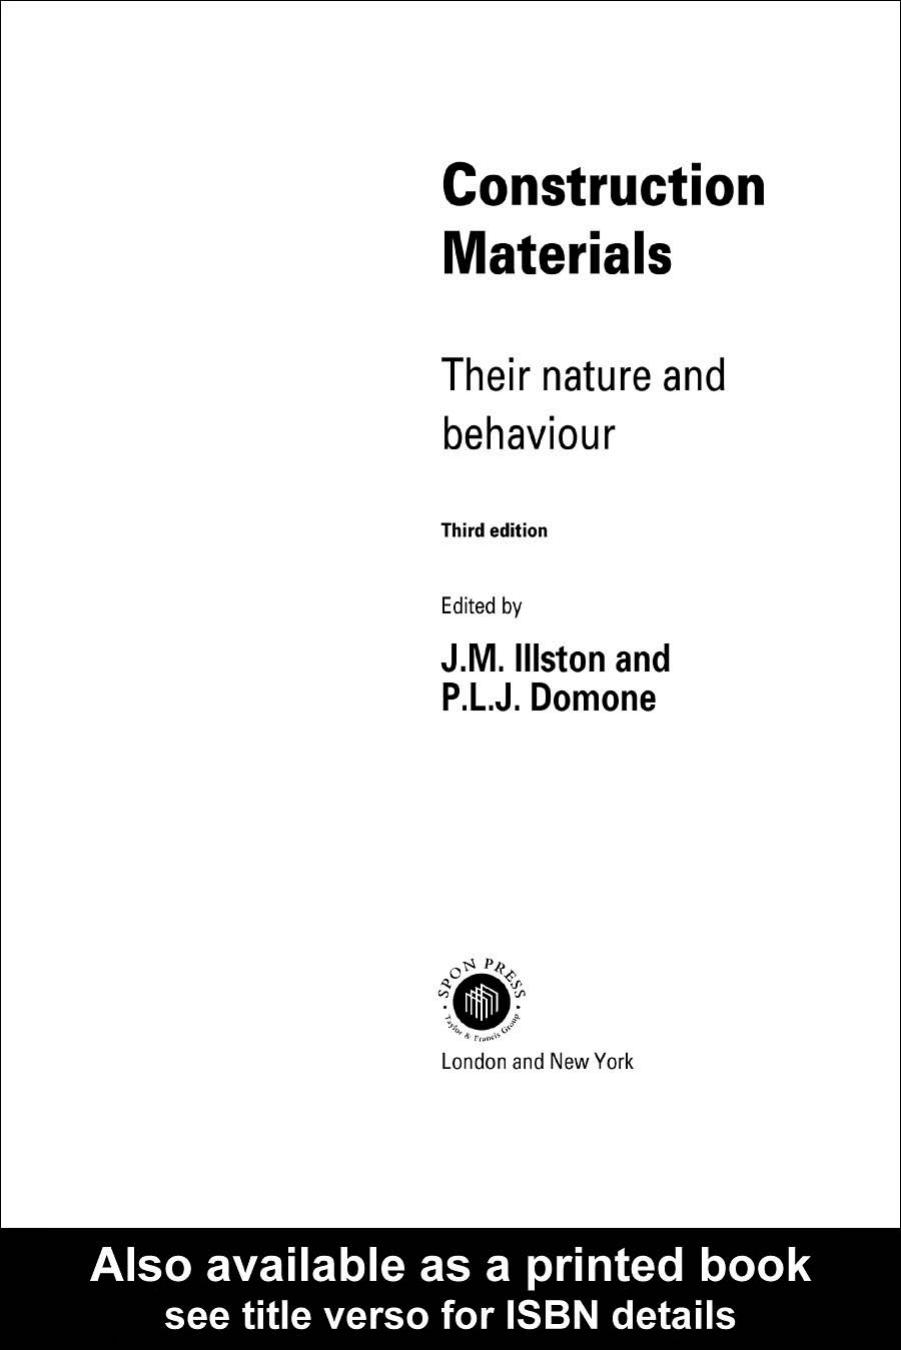 Construction Materials: Their nature and behaviour, Third edition